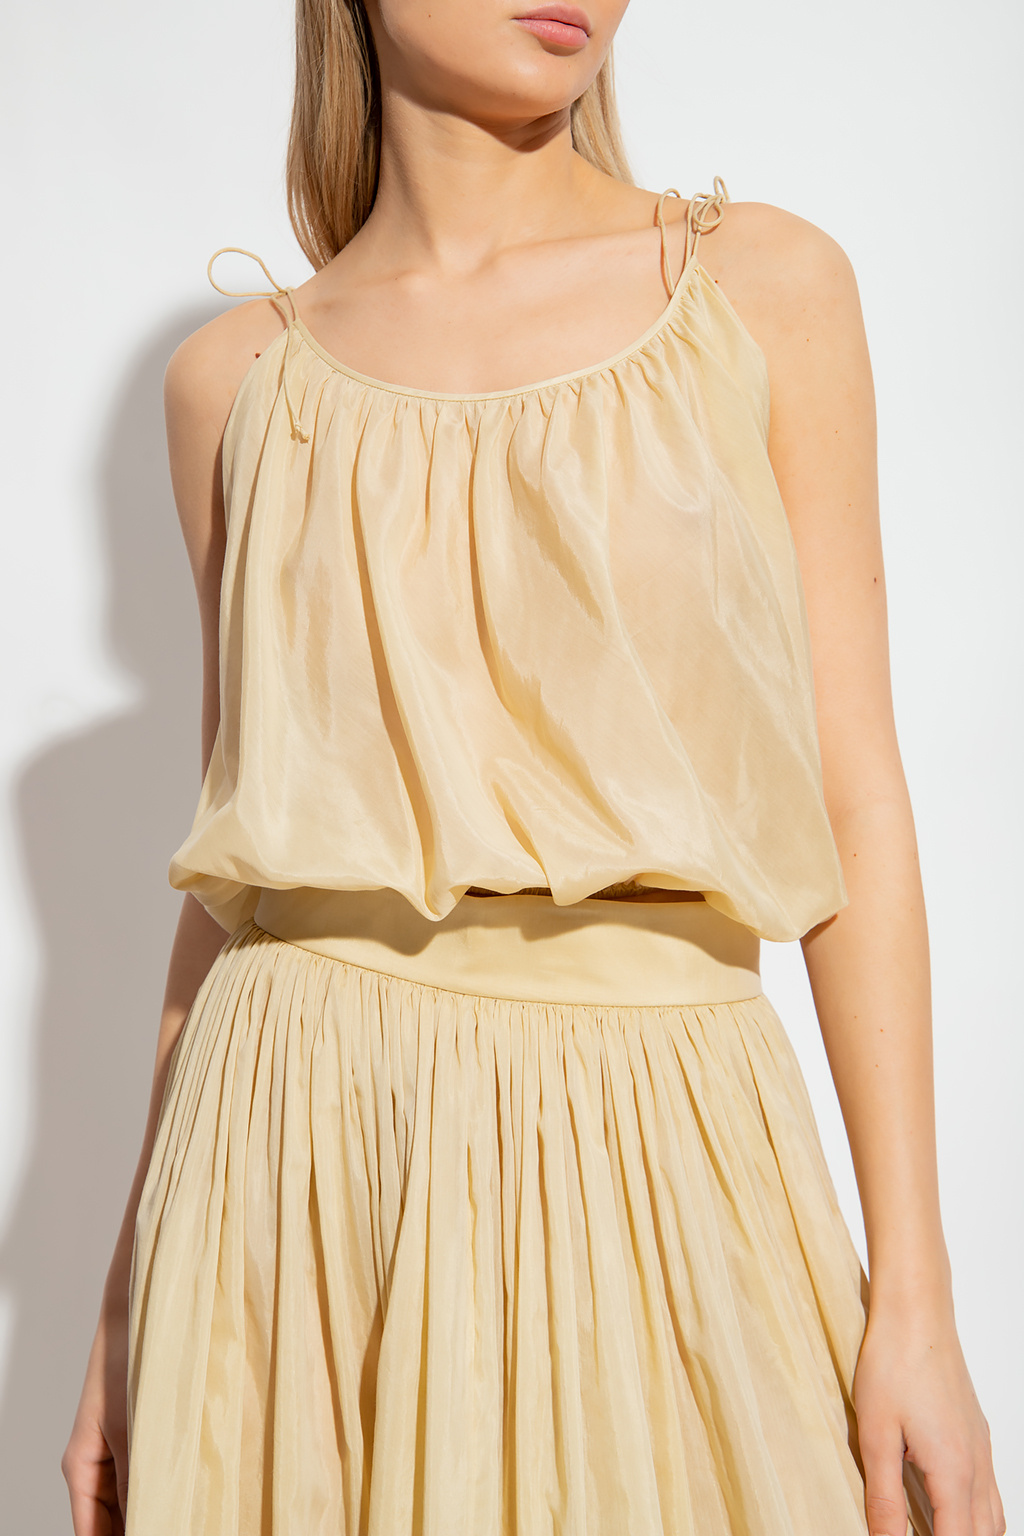 Tory Burch Top with shoulder straps